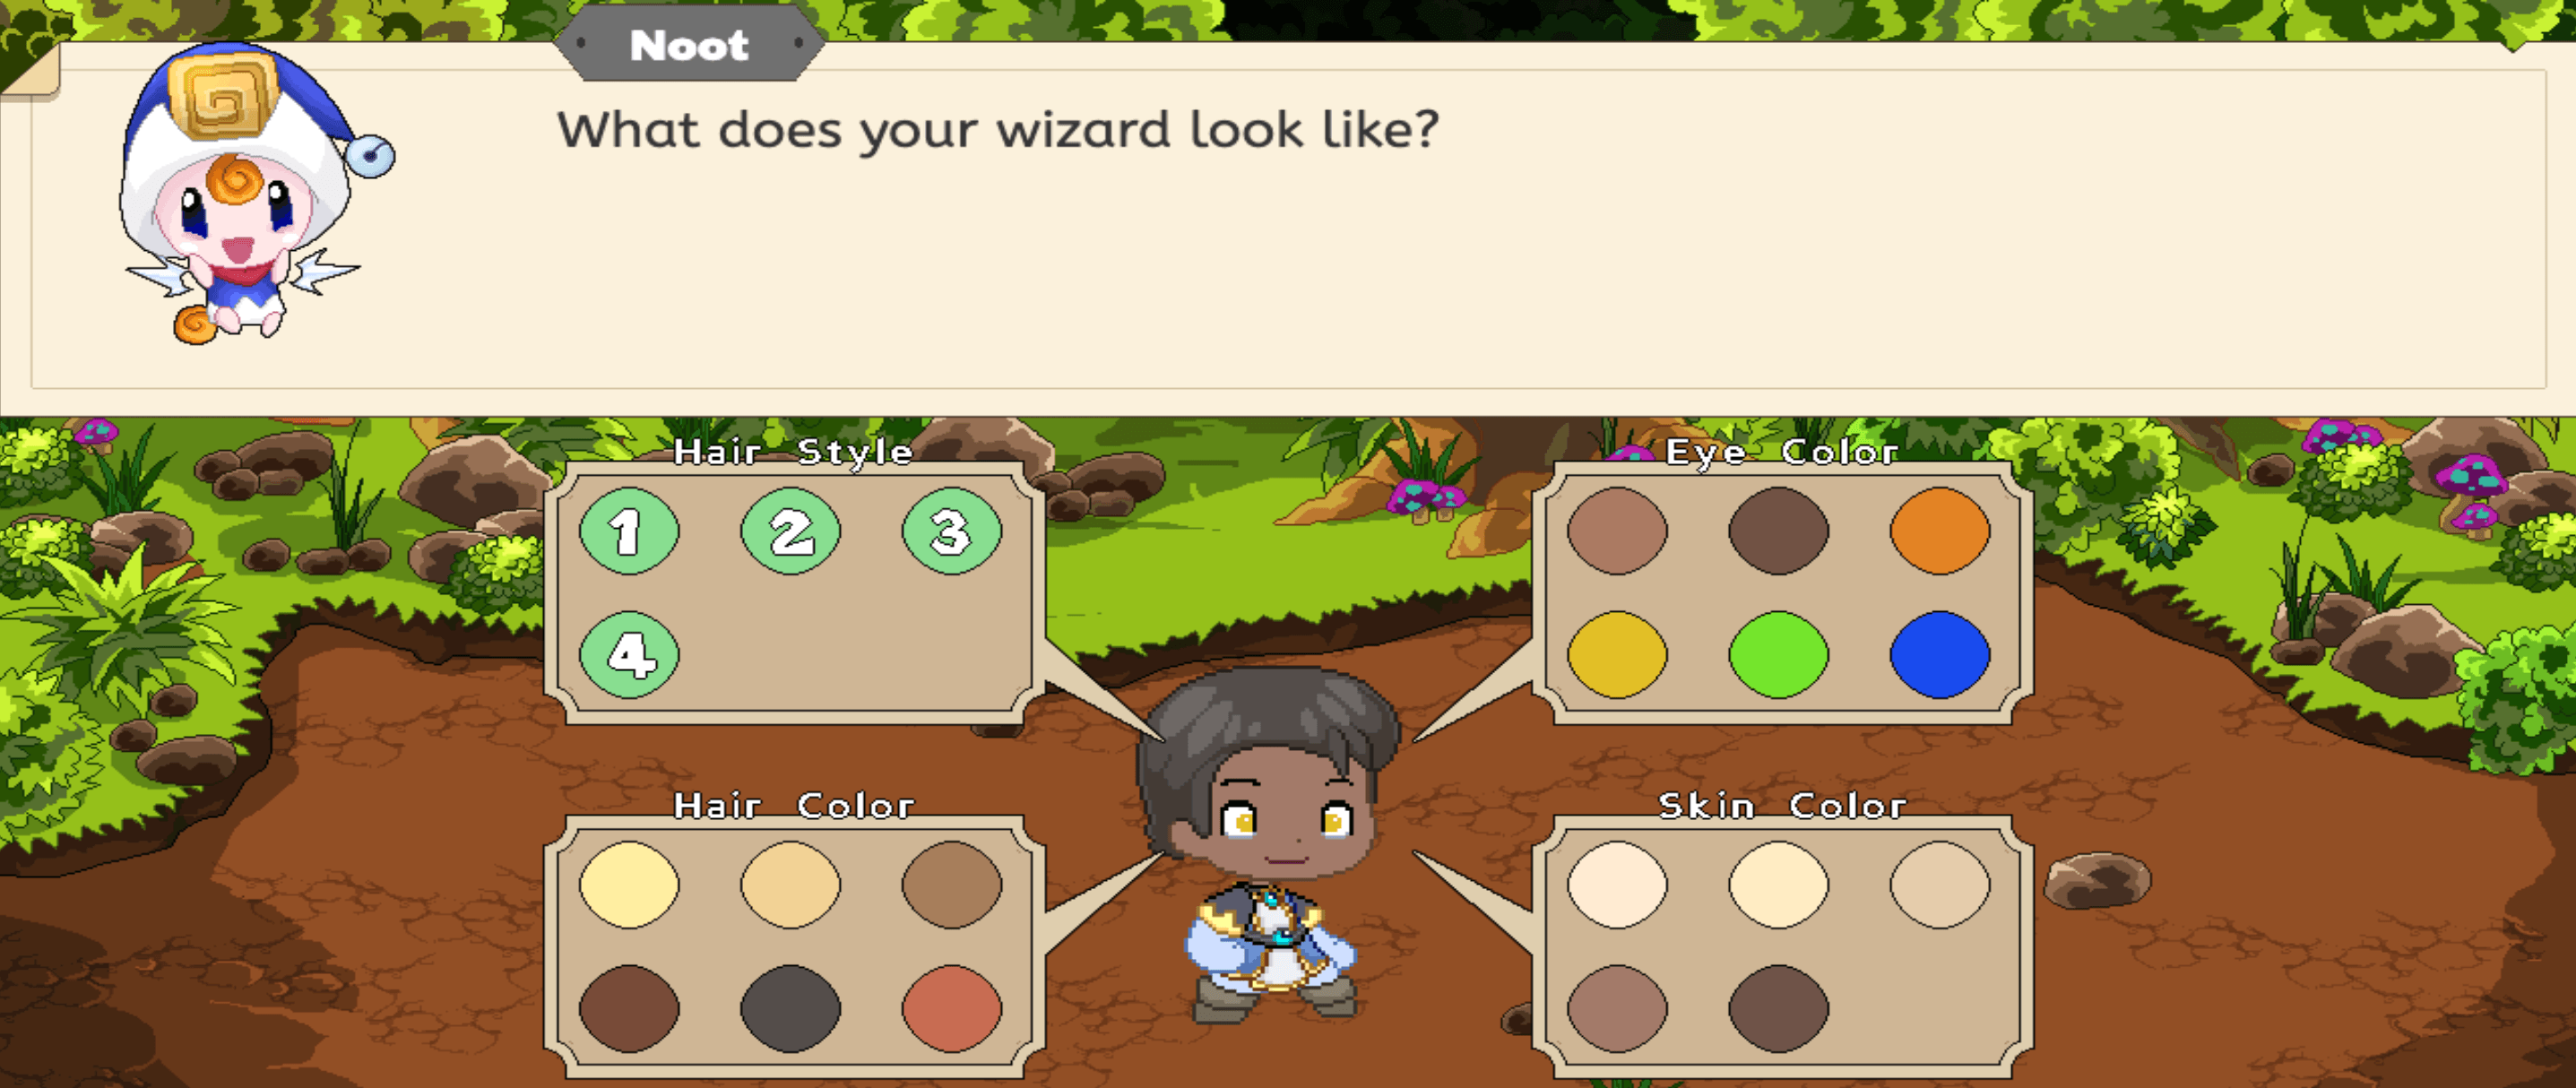 Example of Prodigy Math's wizard creation process with customizations for hair, eye and skin color.